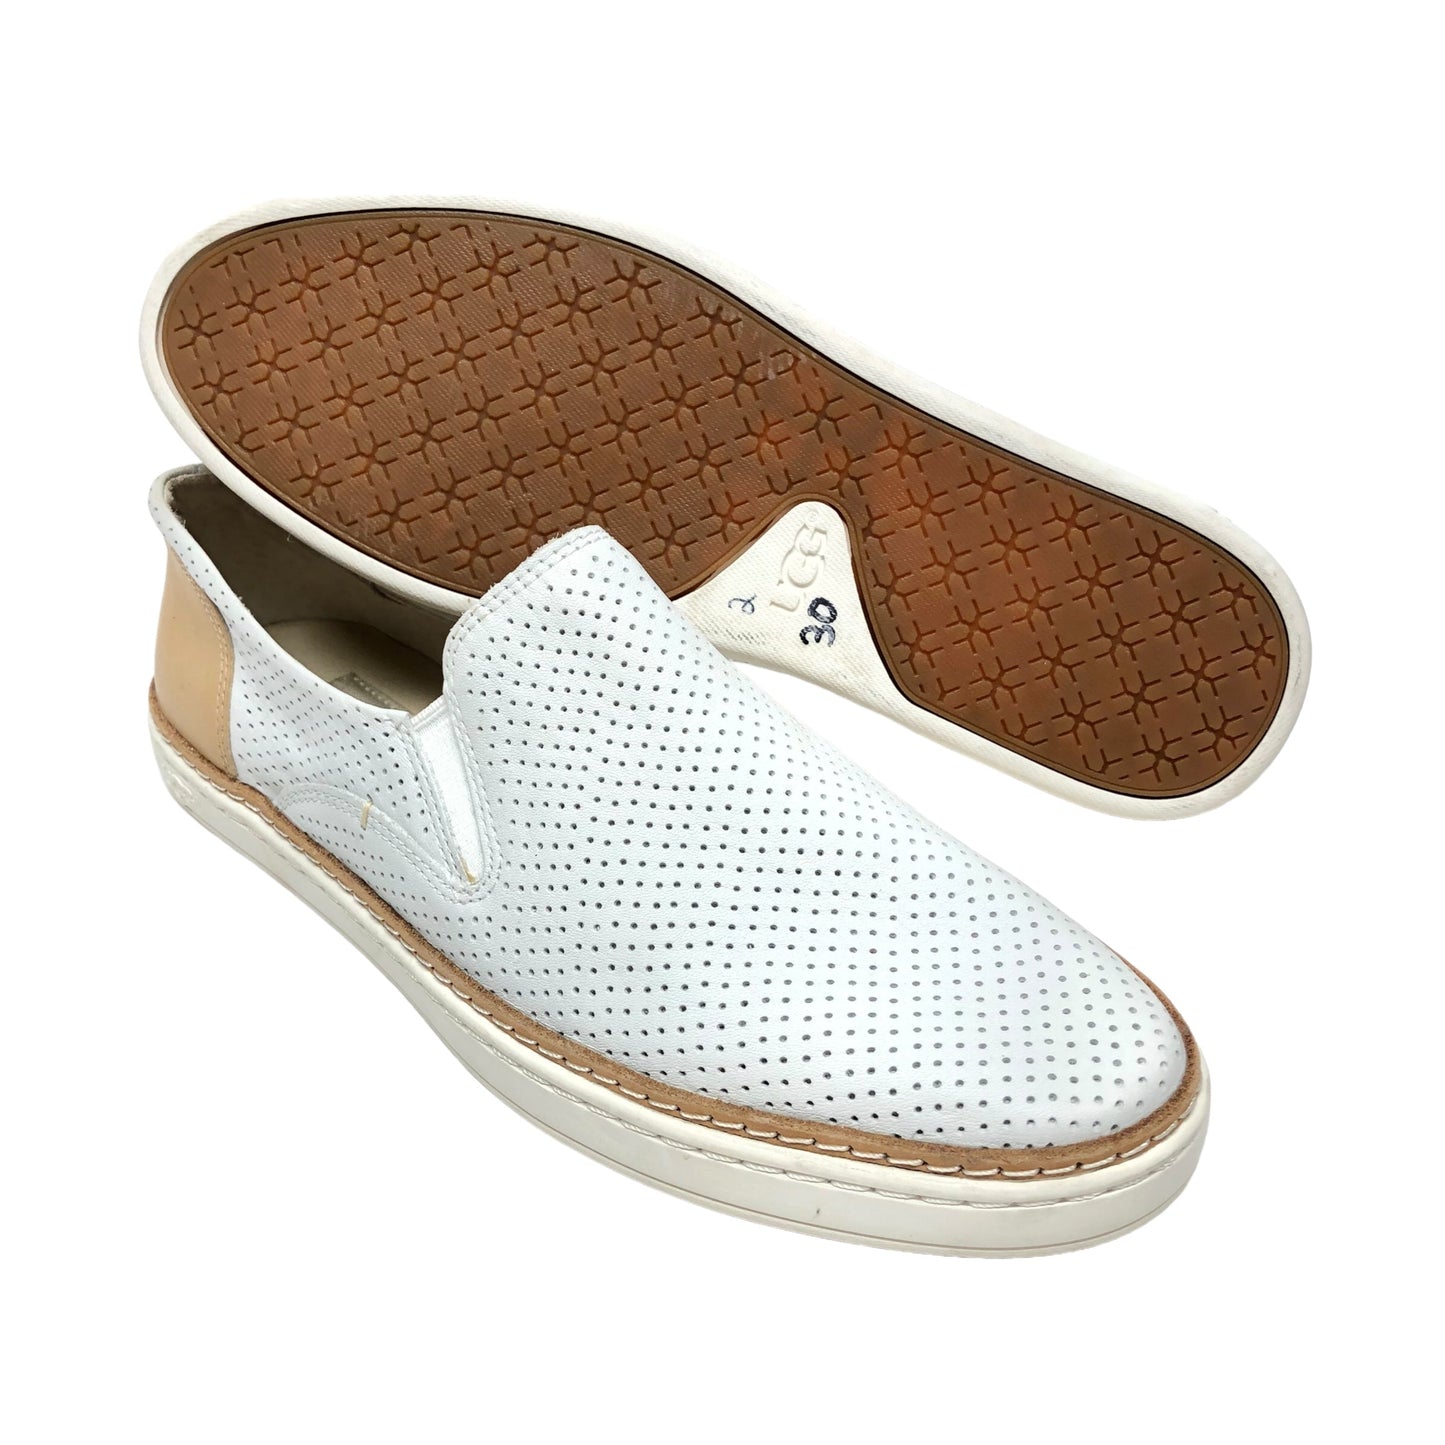 White Shoes Flats Ugg, Size 9